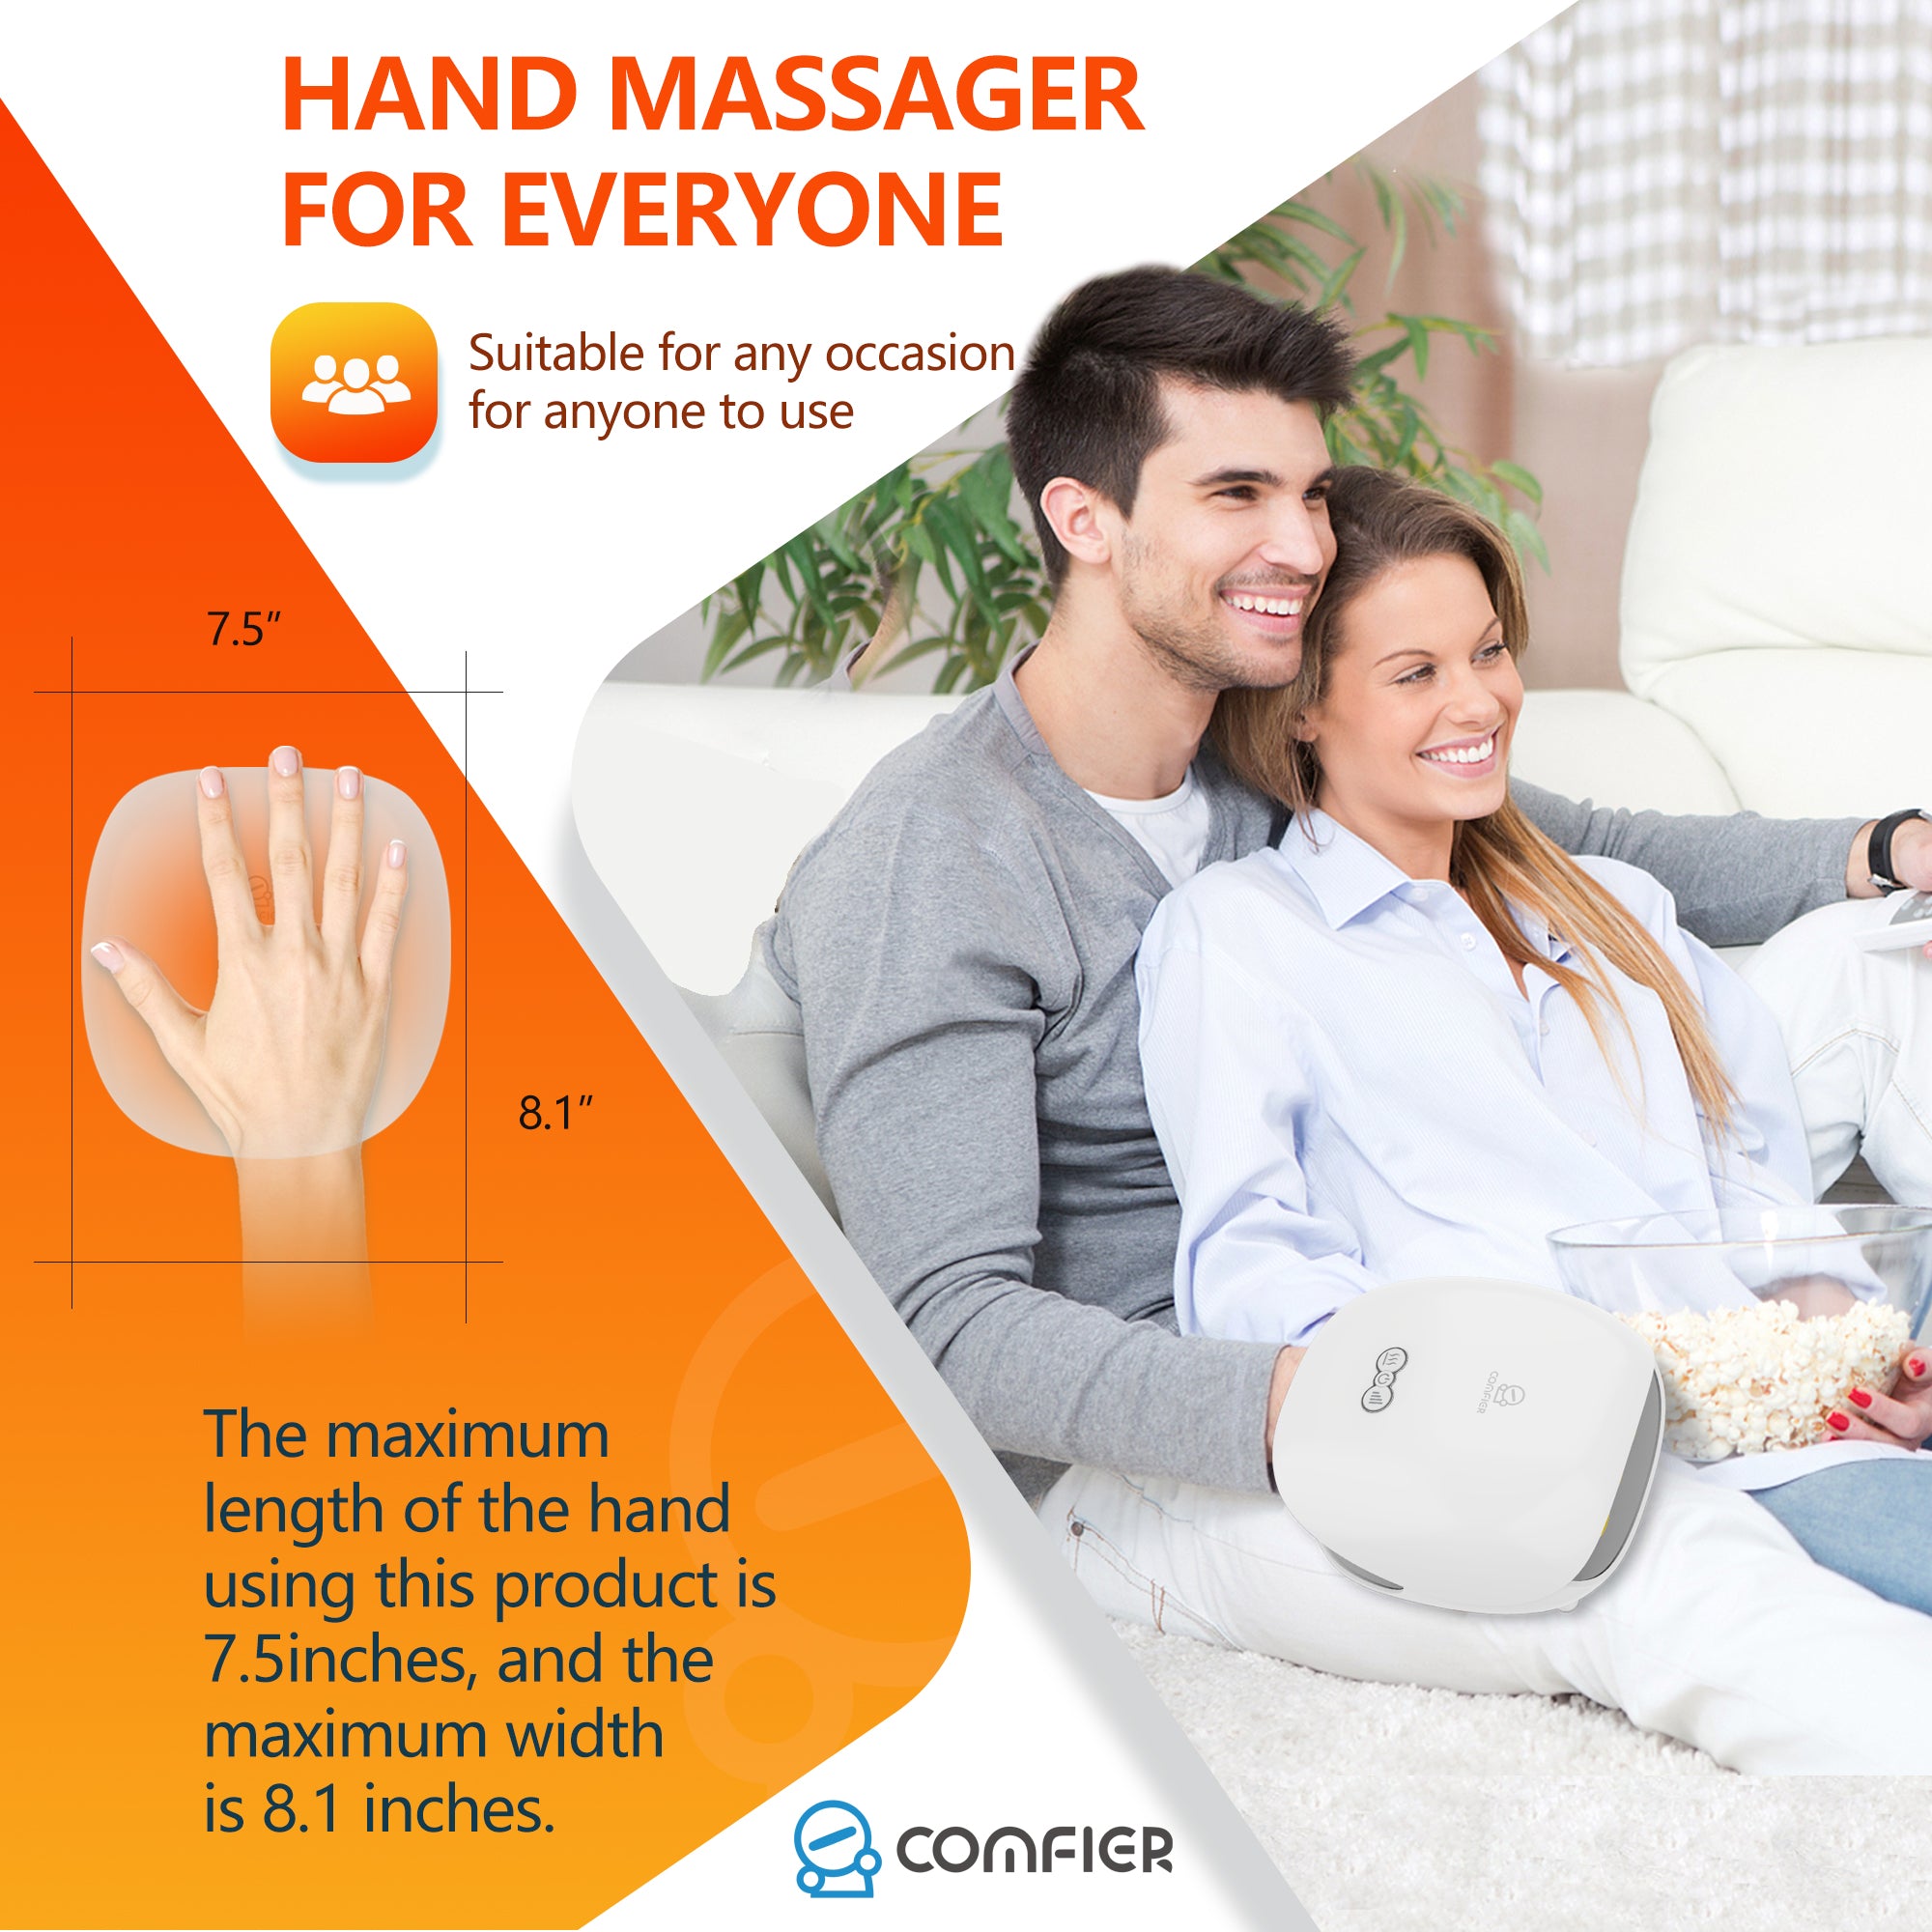 Comfier Wireless Hand Massager with Heat for Carpal Tunnel,Ideal Gifts(White, Colored packaging)- CF-4803-2